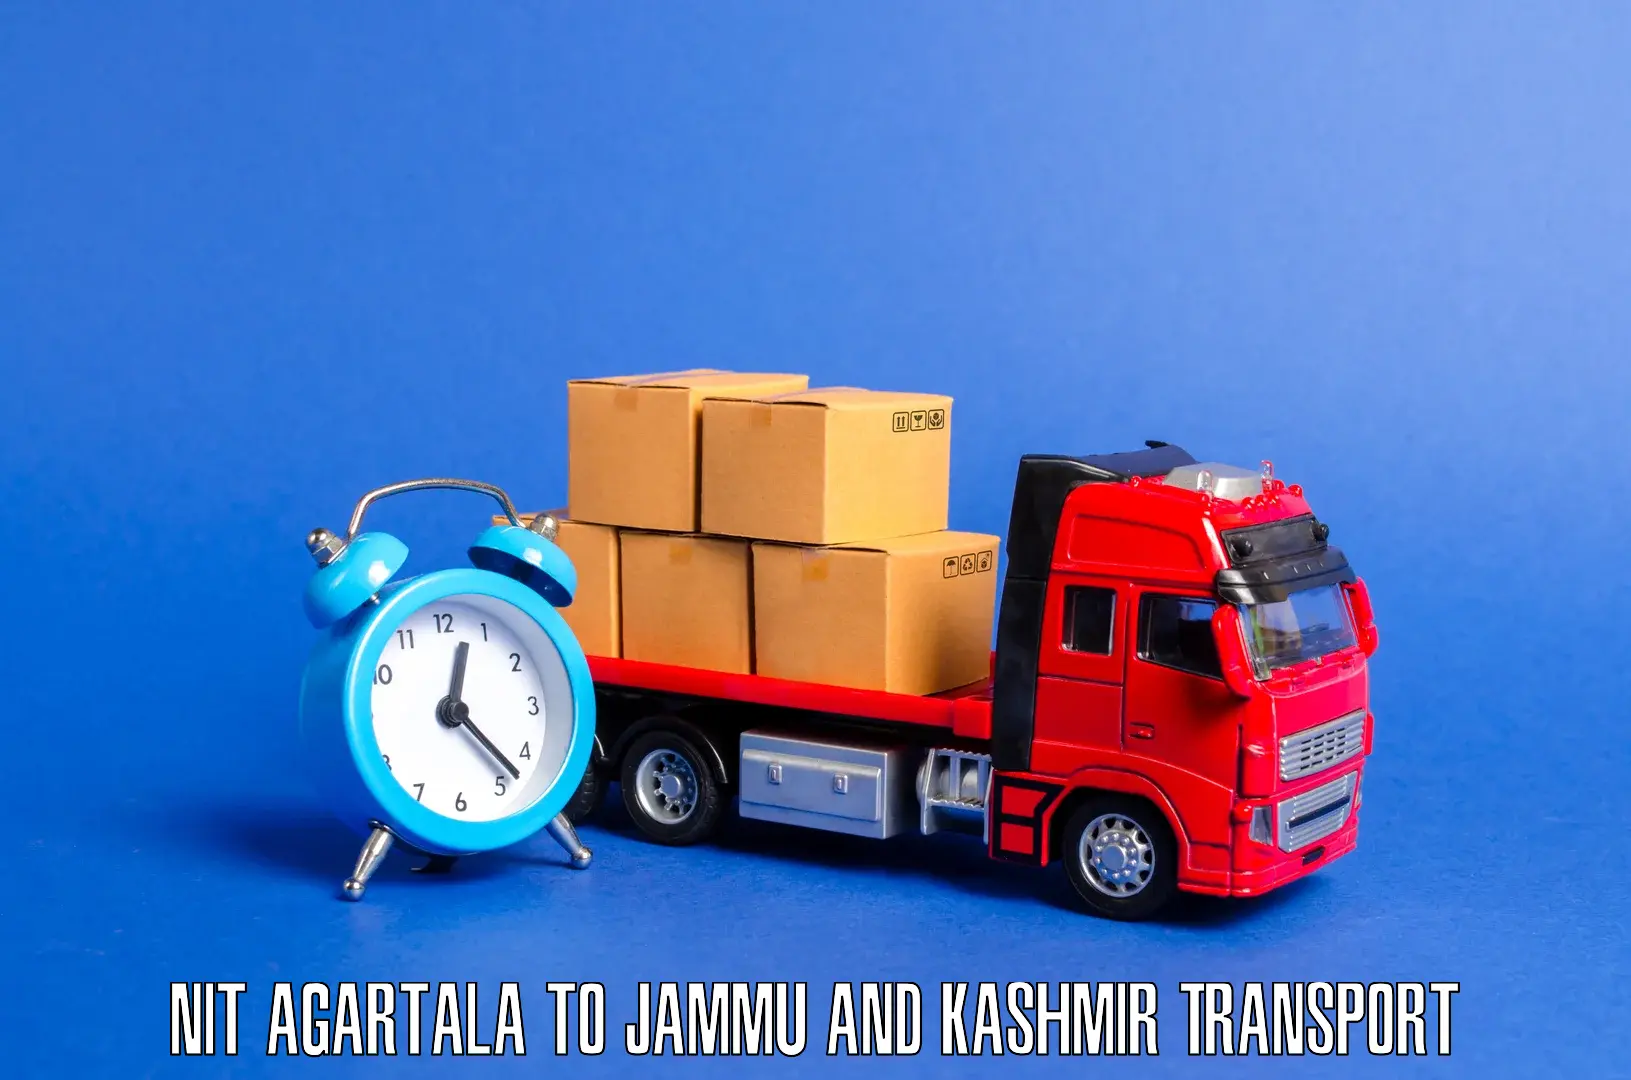 Nearby transport service NIT Agartala to Reasi